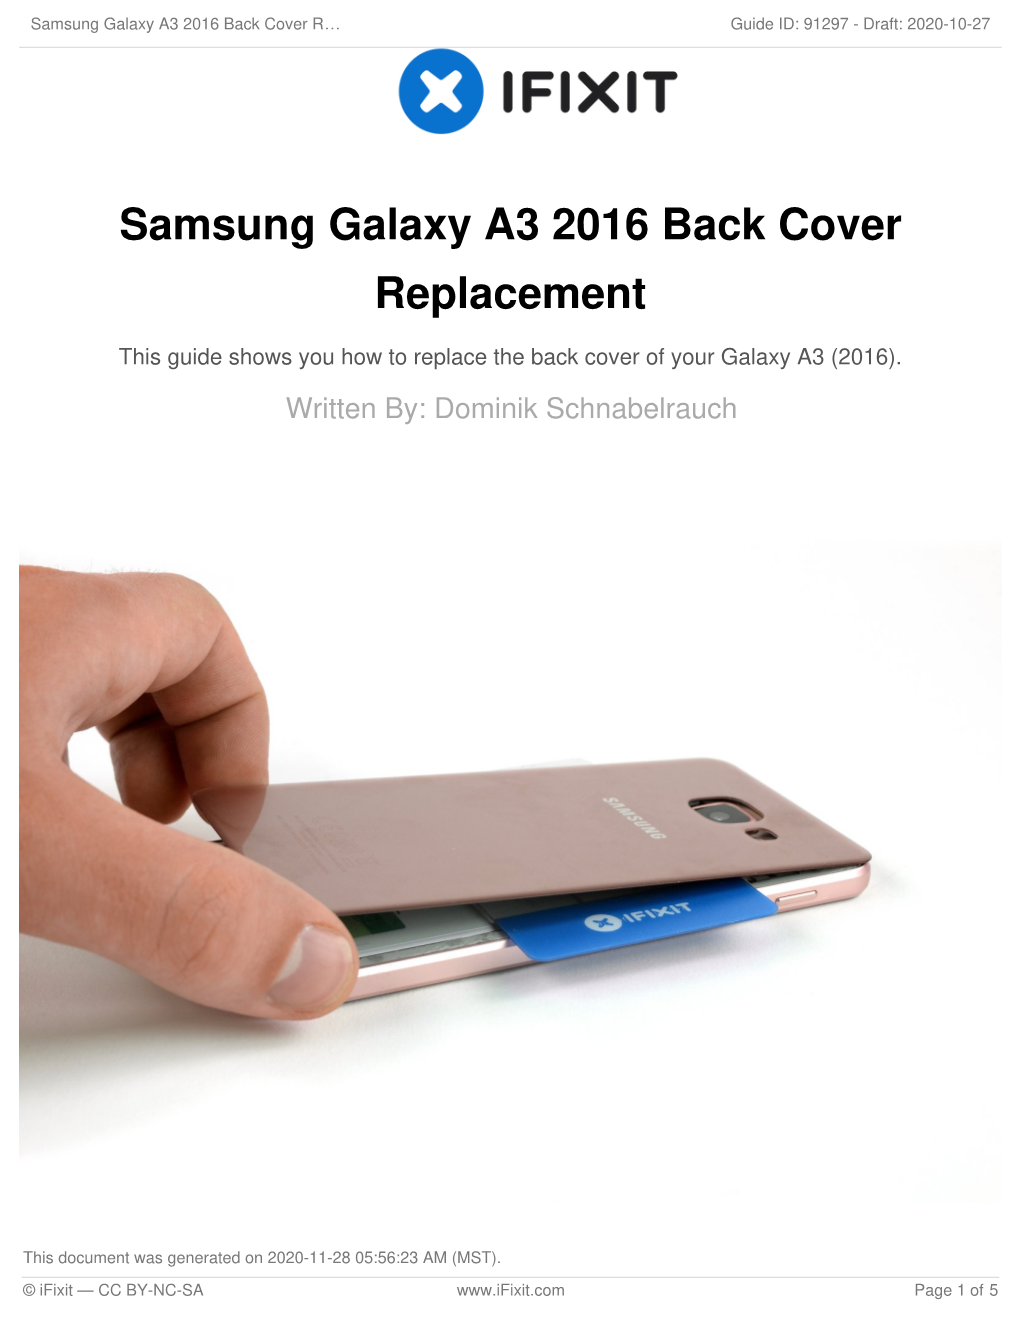 Samsung Galaxy A3 2016 Back Cover Replacement